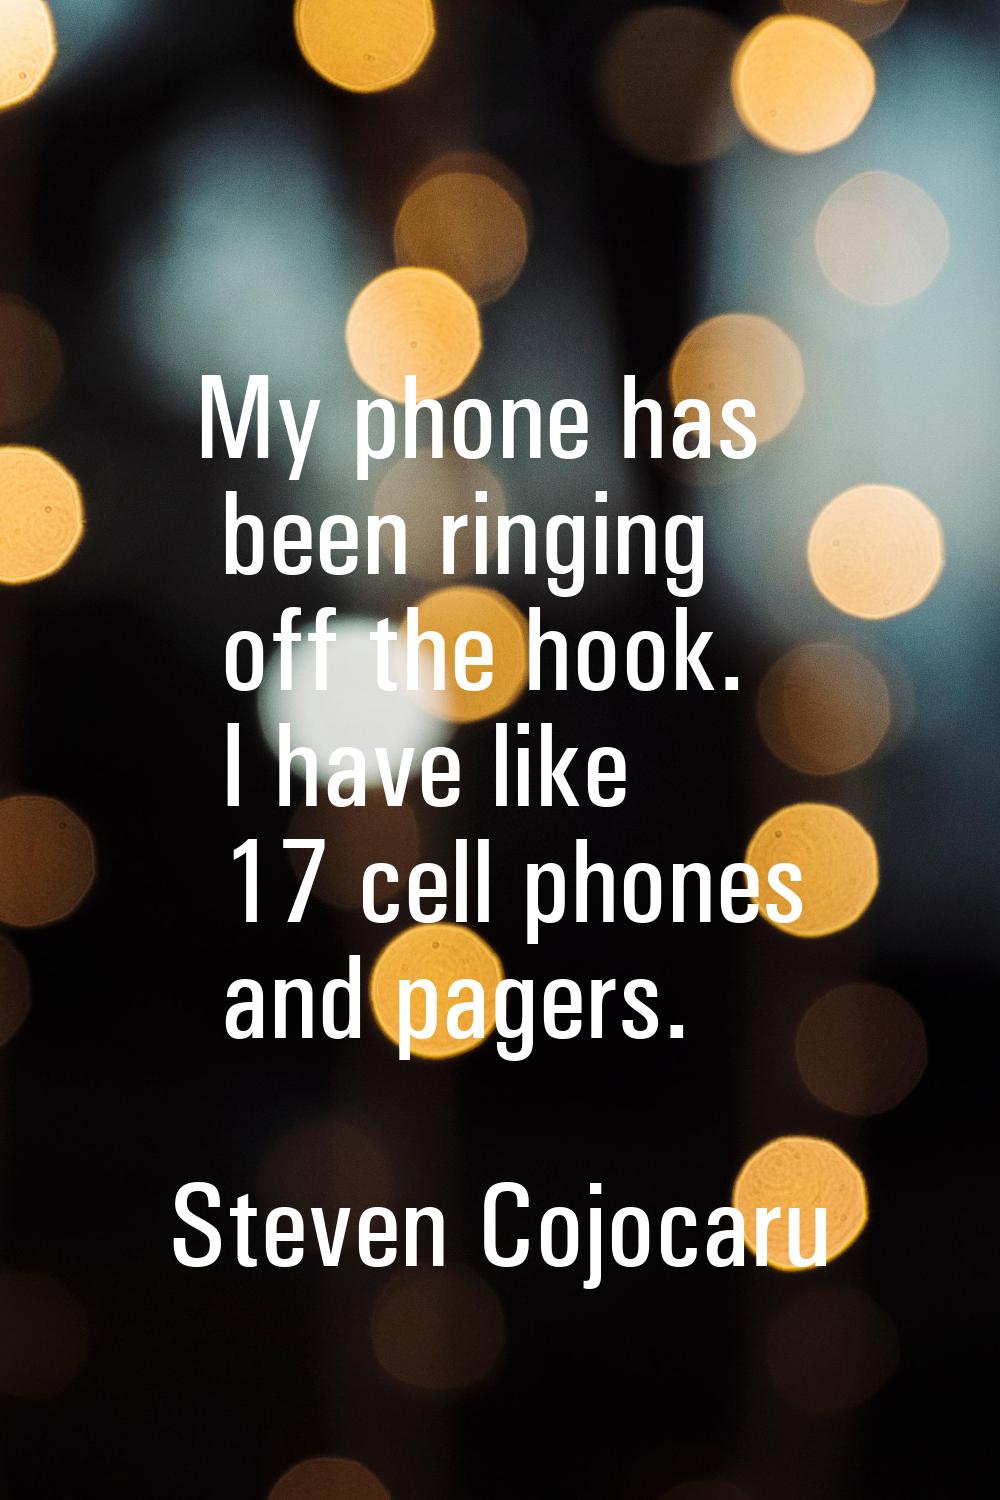 My phone has been ringing off the hook. I have like 17 cell phones and pagers.